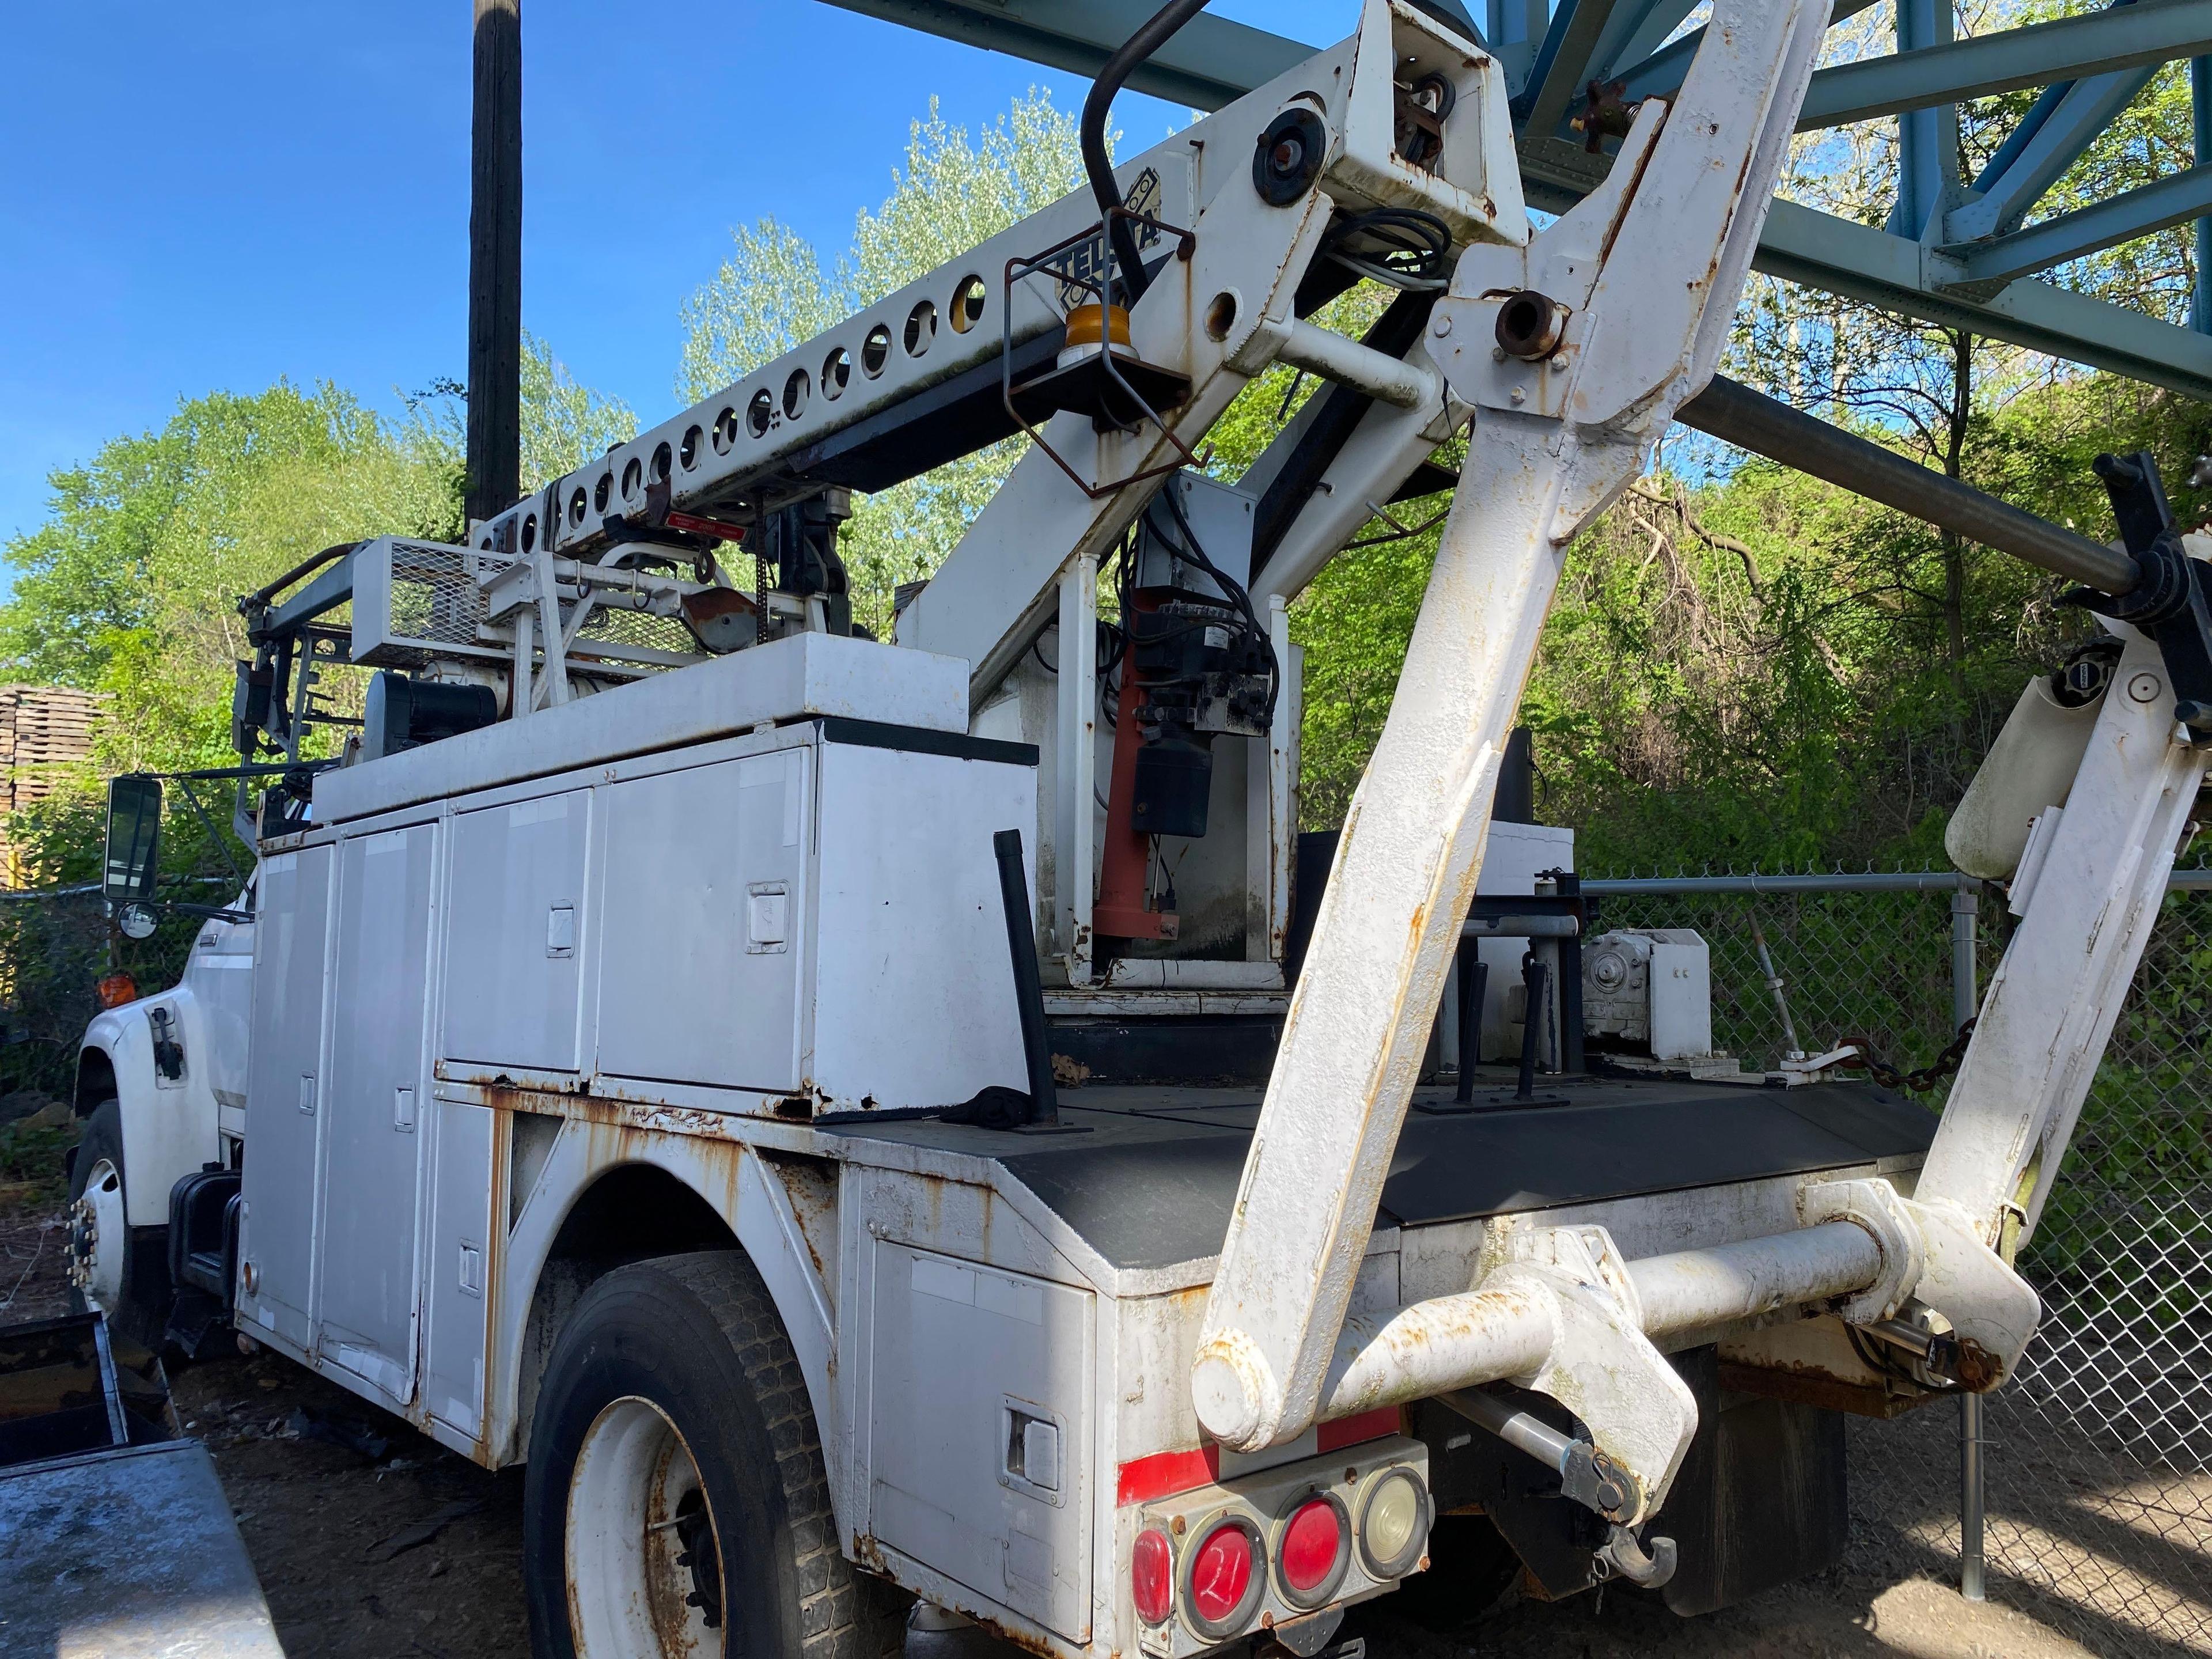 1997 Ford F-800 40ft Bucket Truck (located offsite-please read full description)